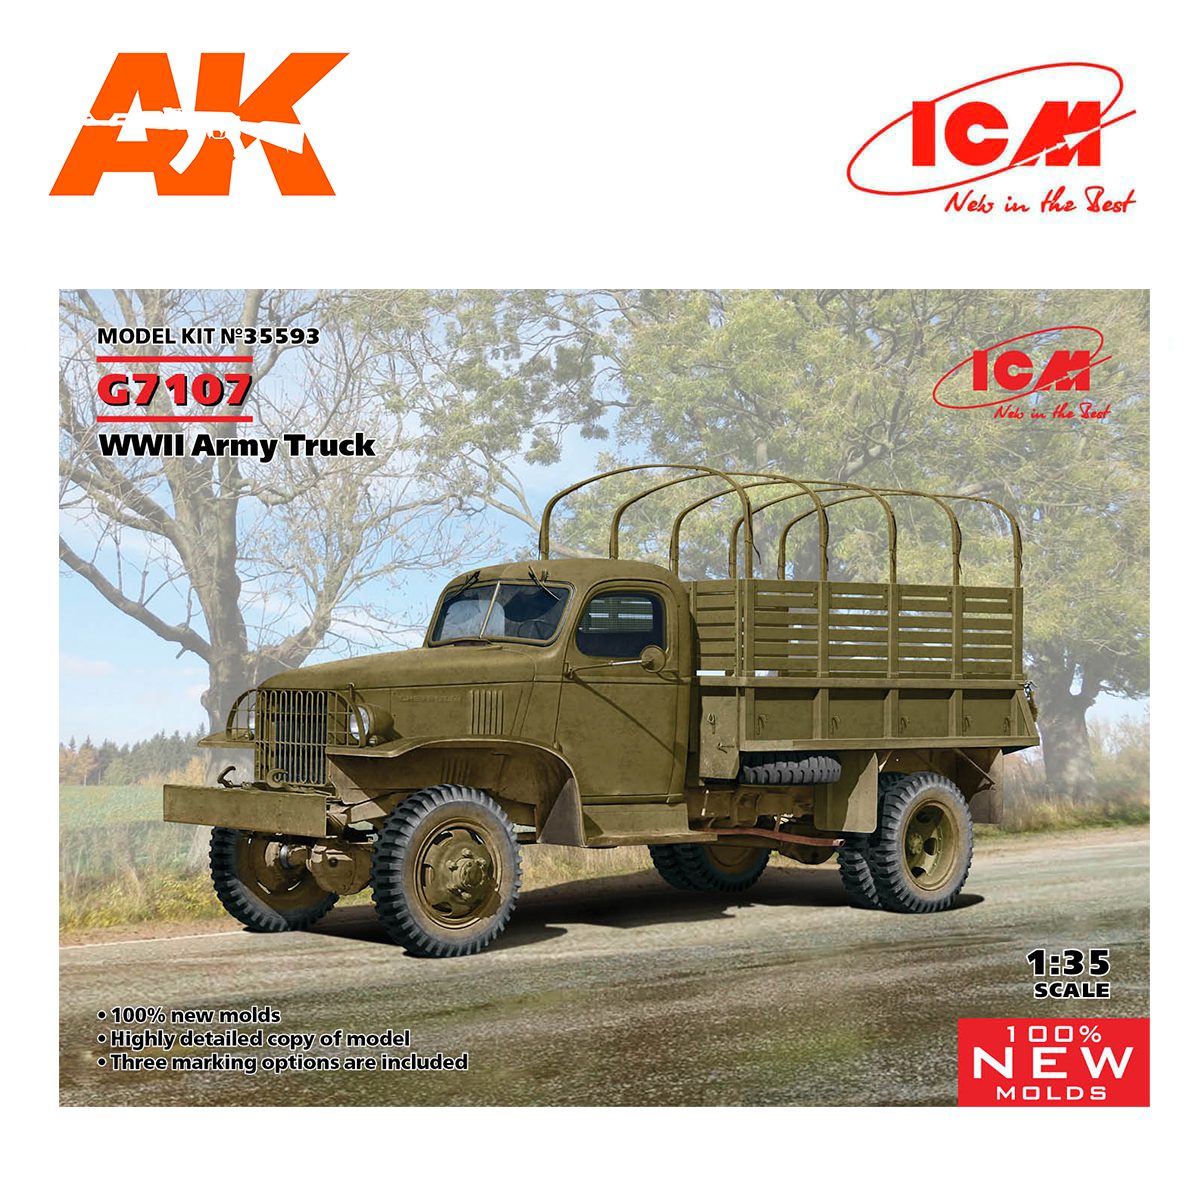 G7107, WWII Army Truck (100% new molds) 1/35